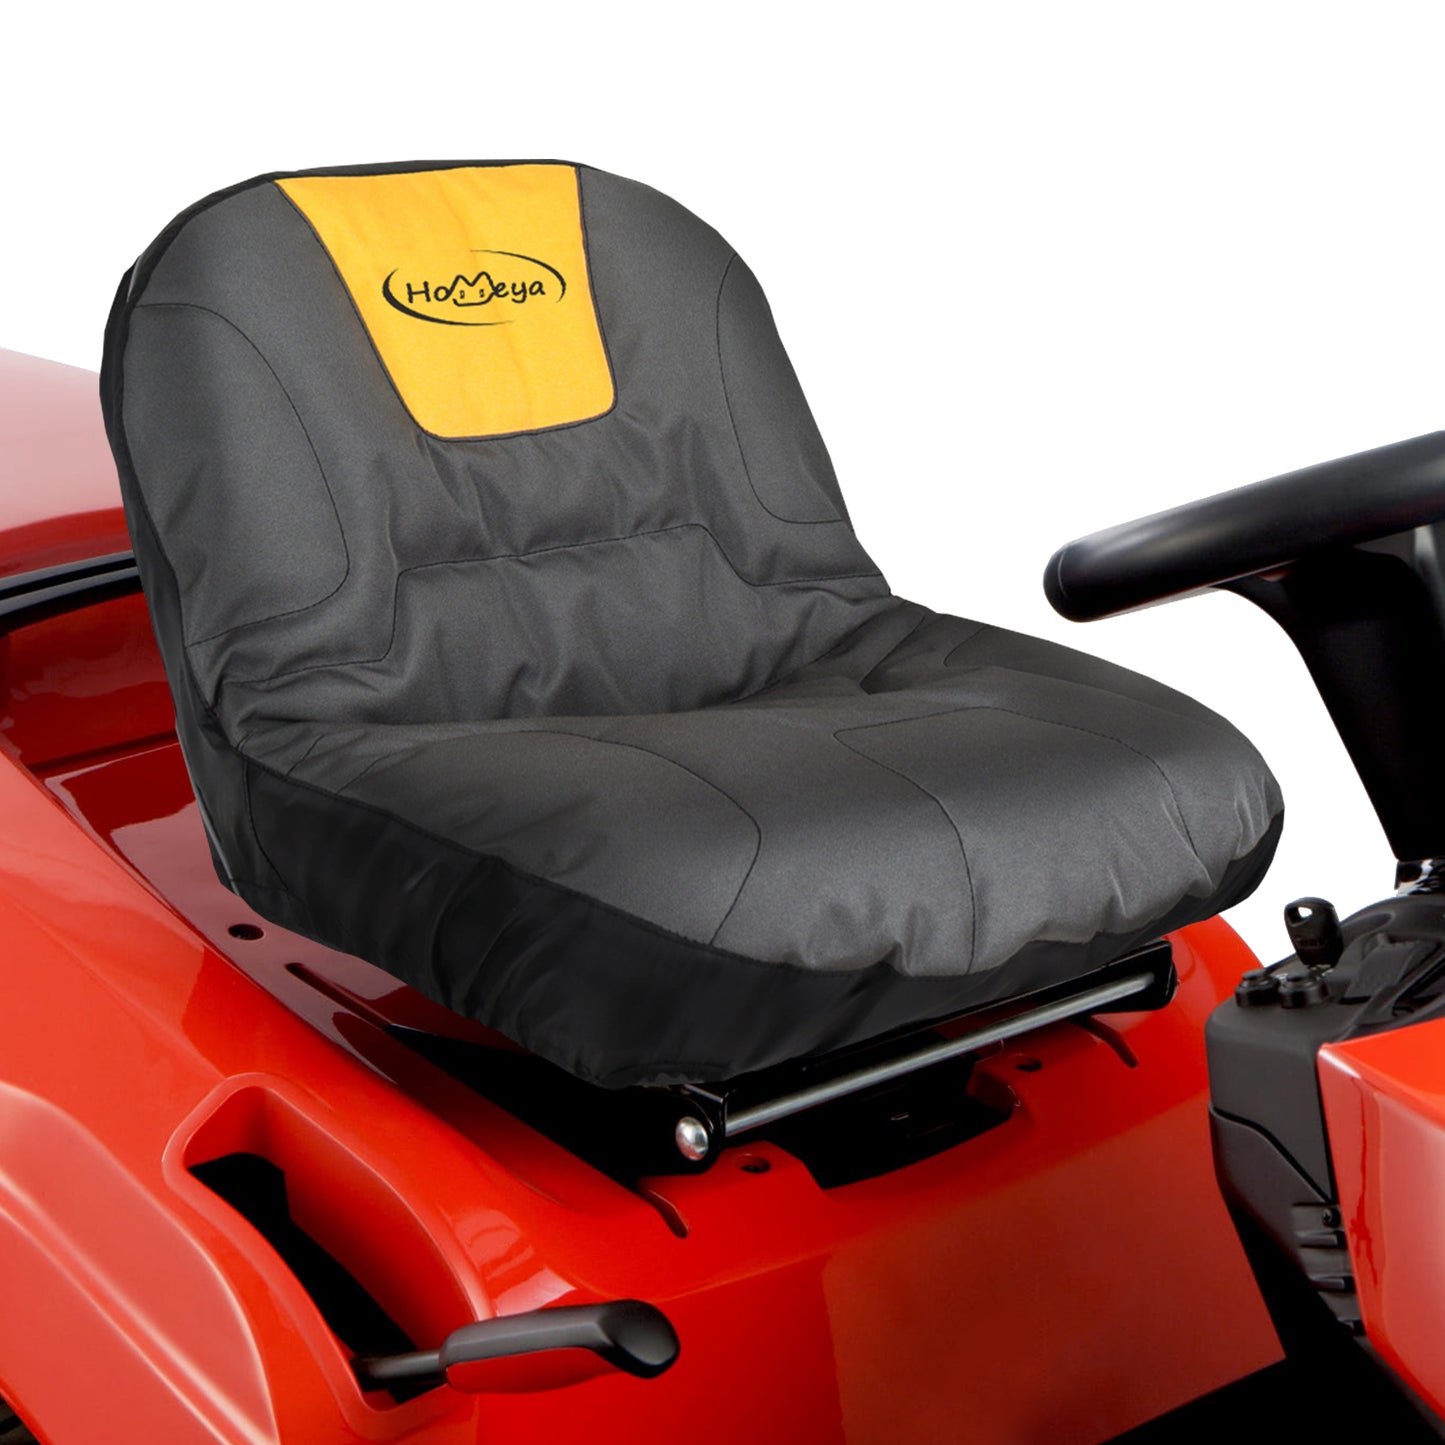 Riding Lawn Mower Seat Cover, Heavy Duty 600D Polyester Oxford Tractor Seat Cover with Padded Cushion Surface, Durable Waterproof Seat Cover Fits Craftsman,Cub Cadet,Kubota Lawn Mower Tractor